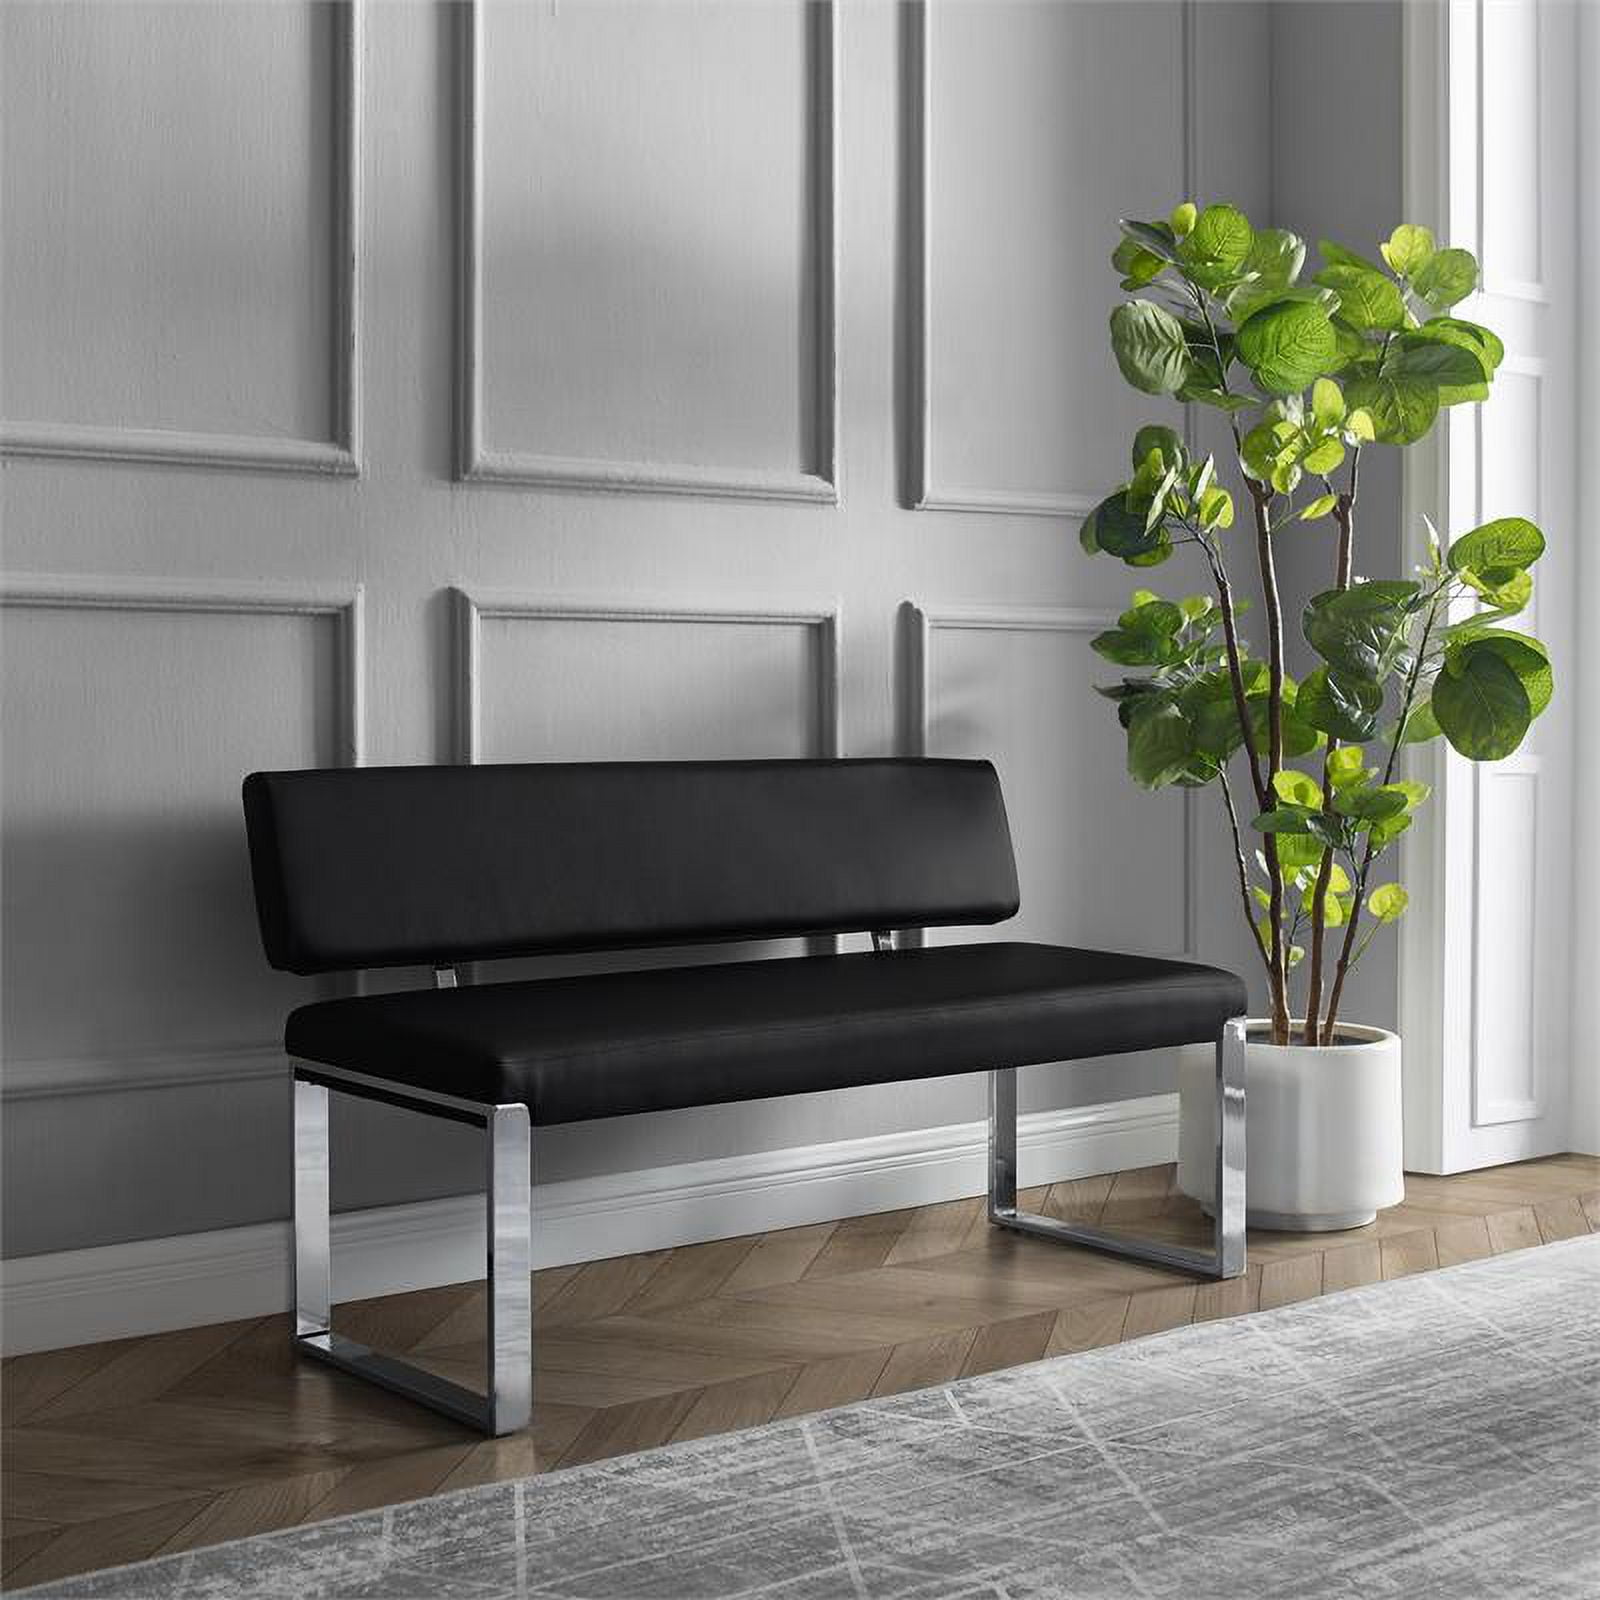 Posh Living BH208-01BN-UE Mabel Upholstered Faux Leather Bench with  Rectangular Chrome Legs, Brown